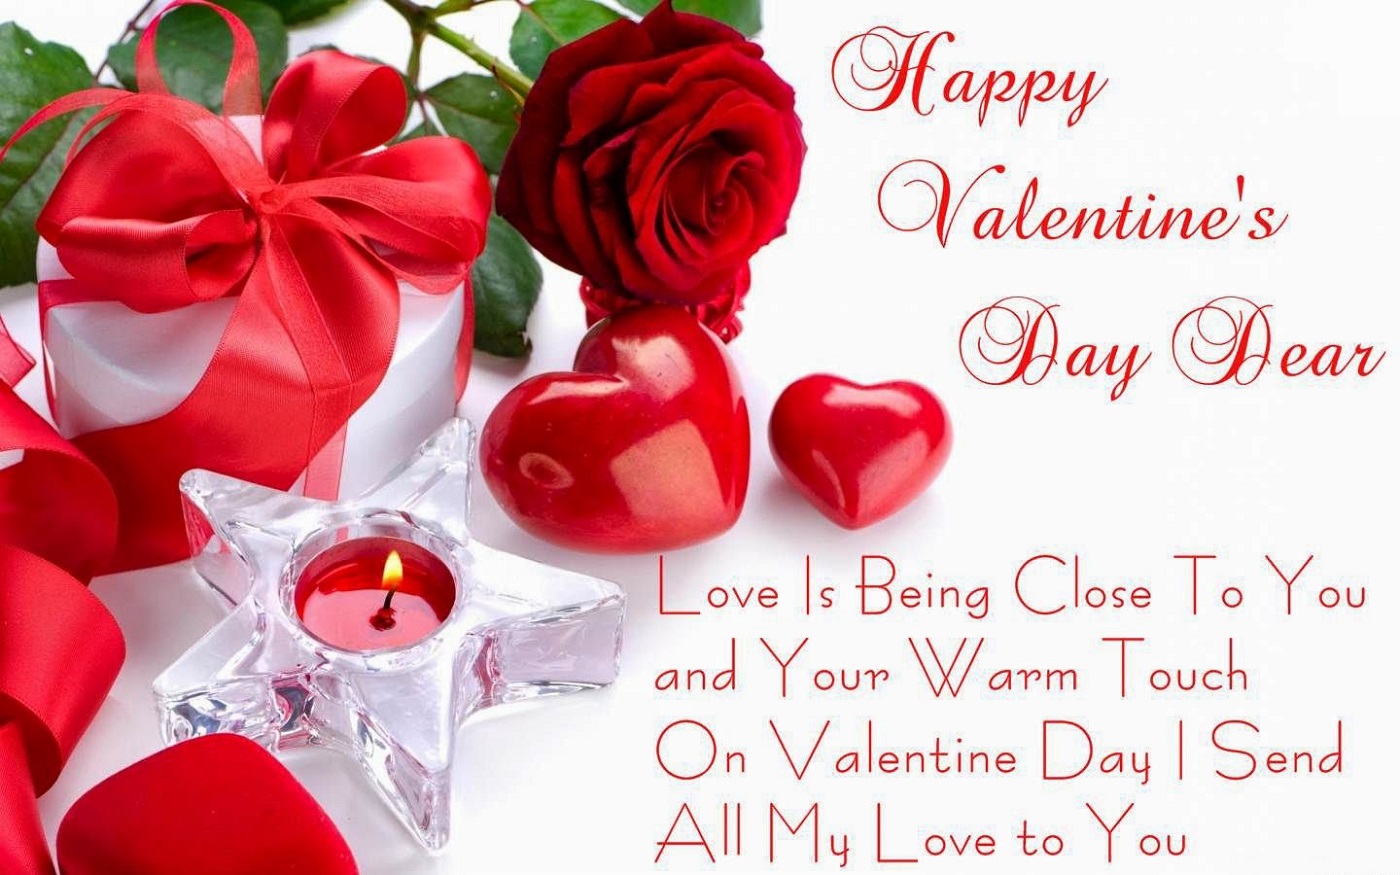 Top 60 Happy Valentines Day 2017 Quotes For GF BF Happy Valentines day 2018 Quotes Wishes Wallpapers Greetings Cards Sayings Poems Parade